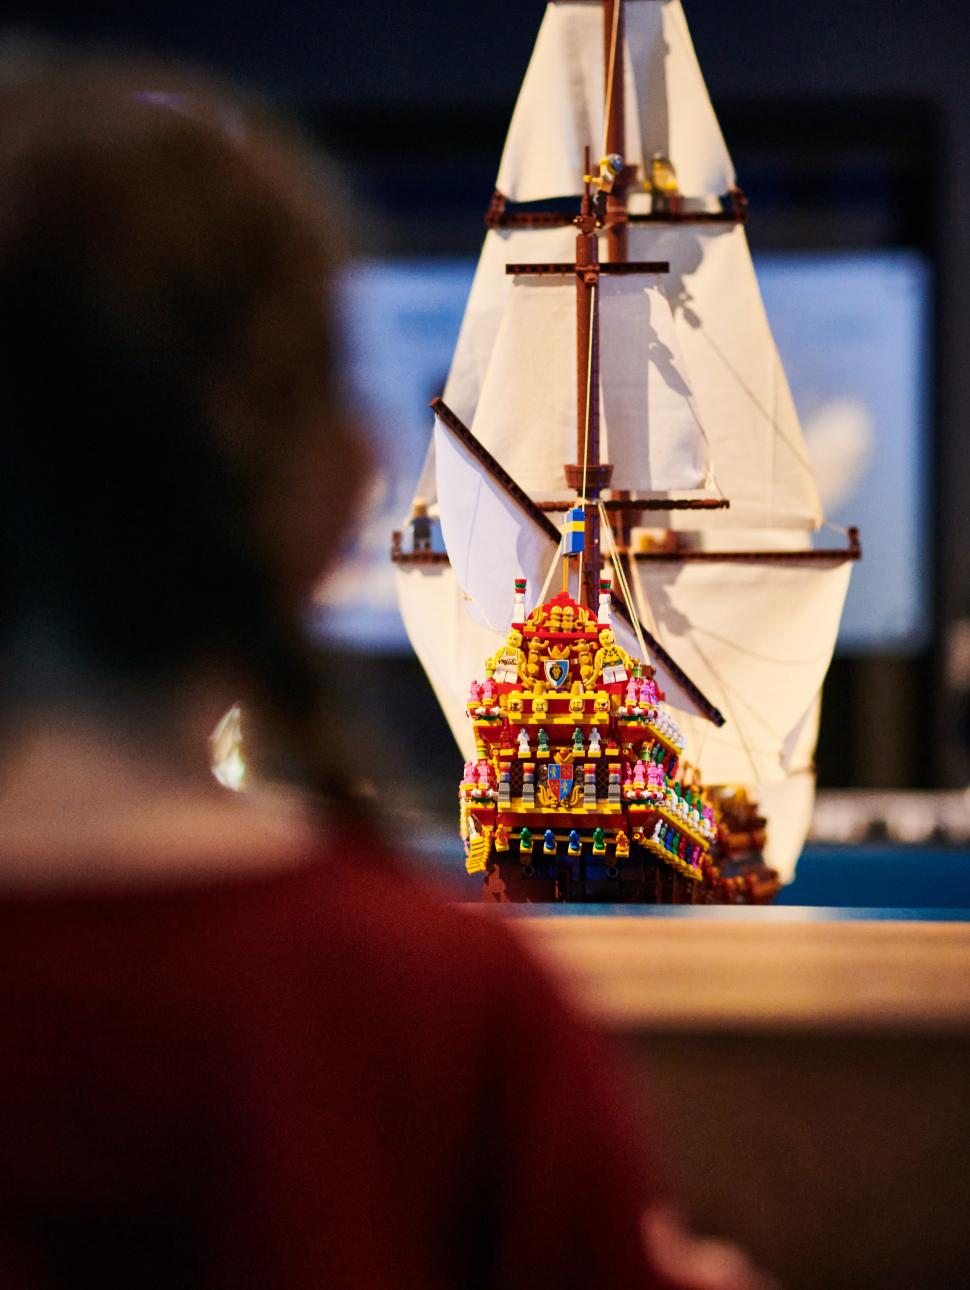 A young girl stands looking at an illuminated LEGO model of a ship in a museum display